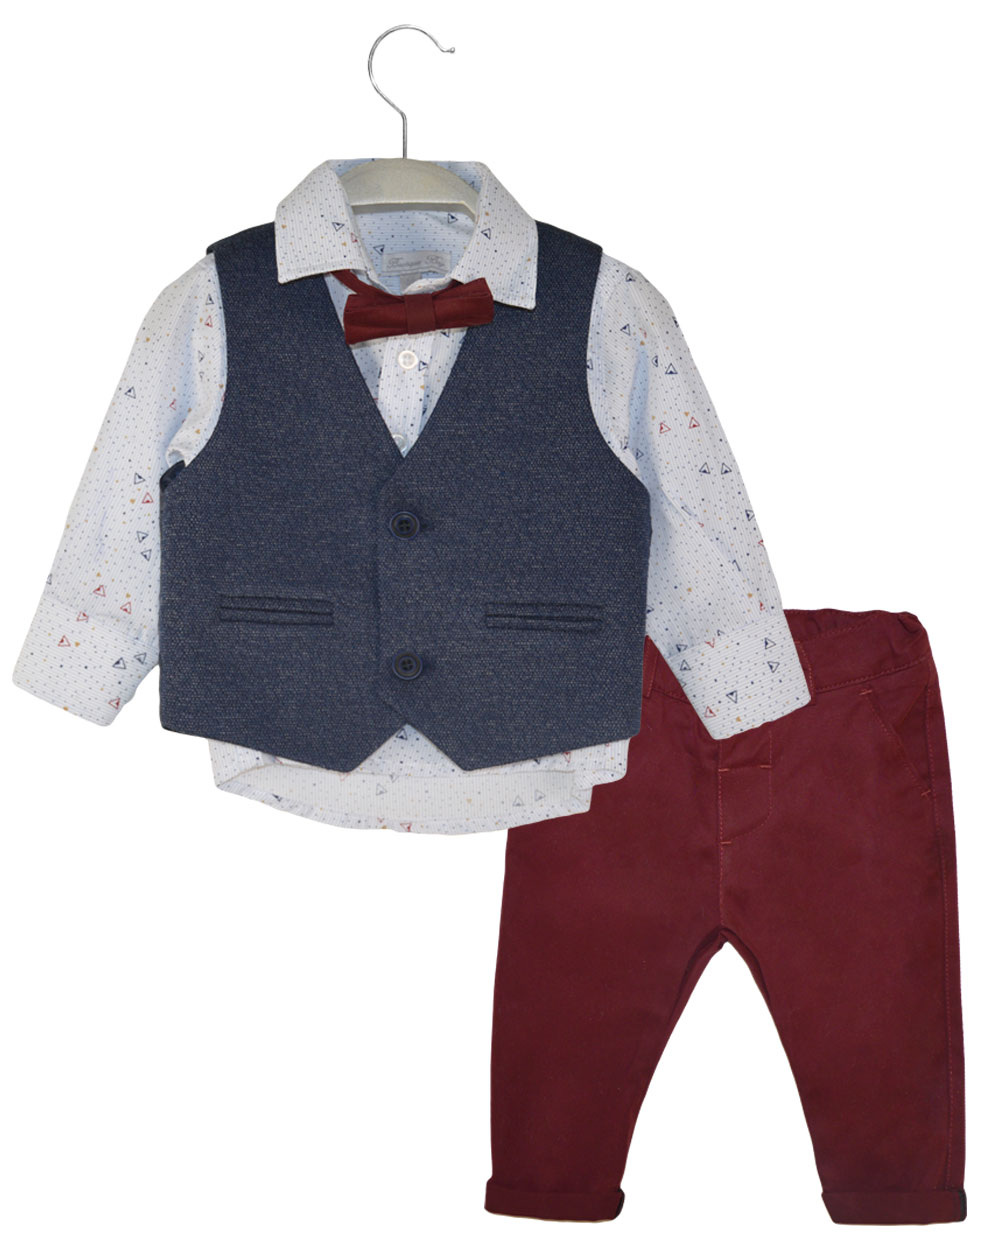 Set of 4 pieces, printed shirt, vest, trousers with adjustable waistband and bow tie